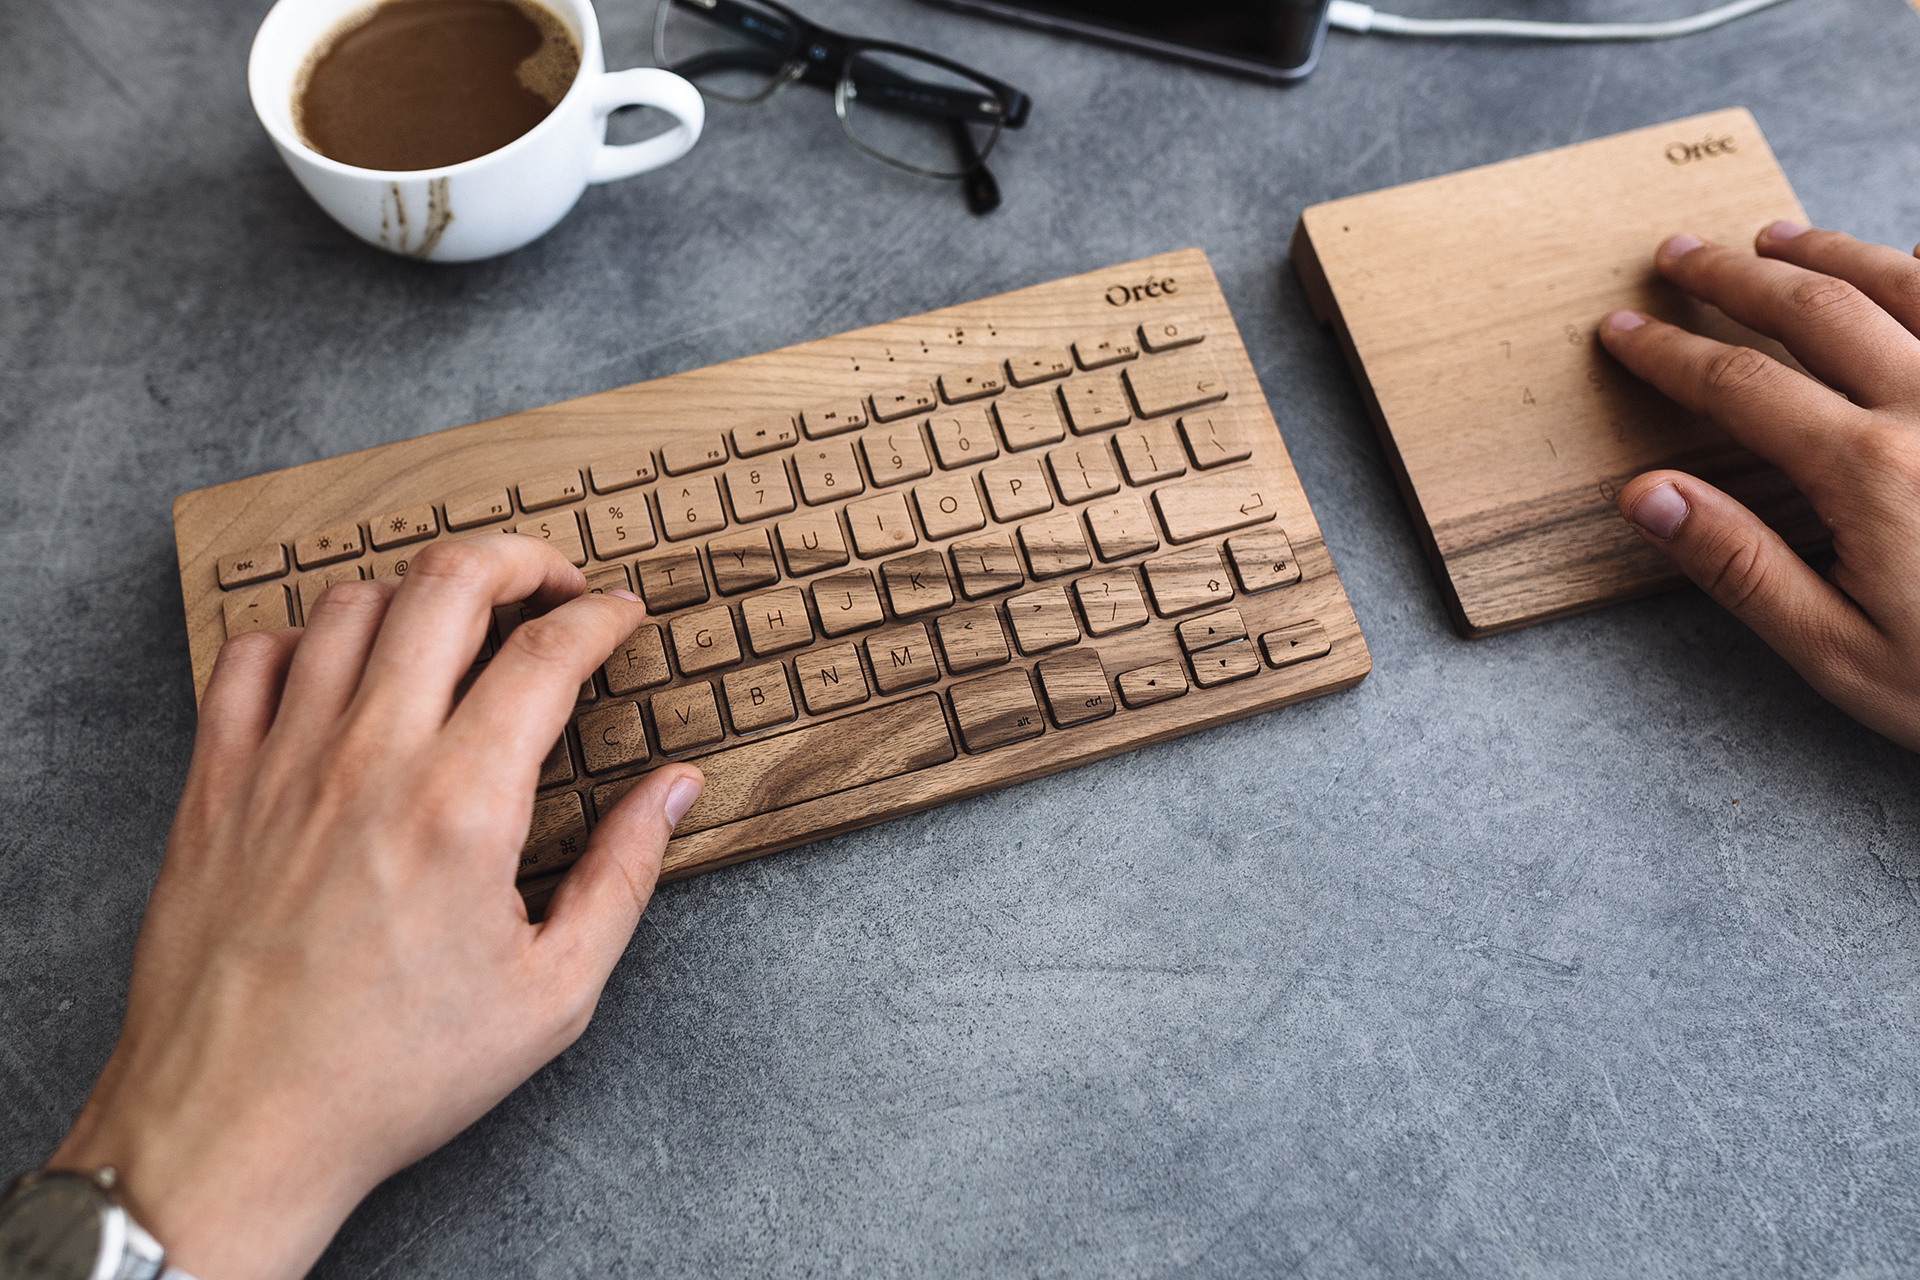 Product Design: Portable Wireless Keyboard by Ore Artisans